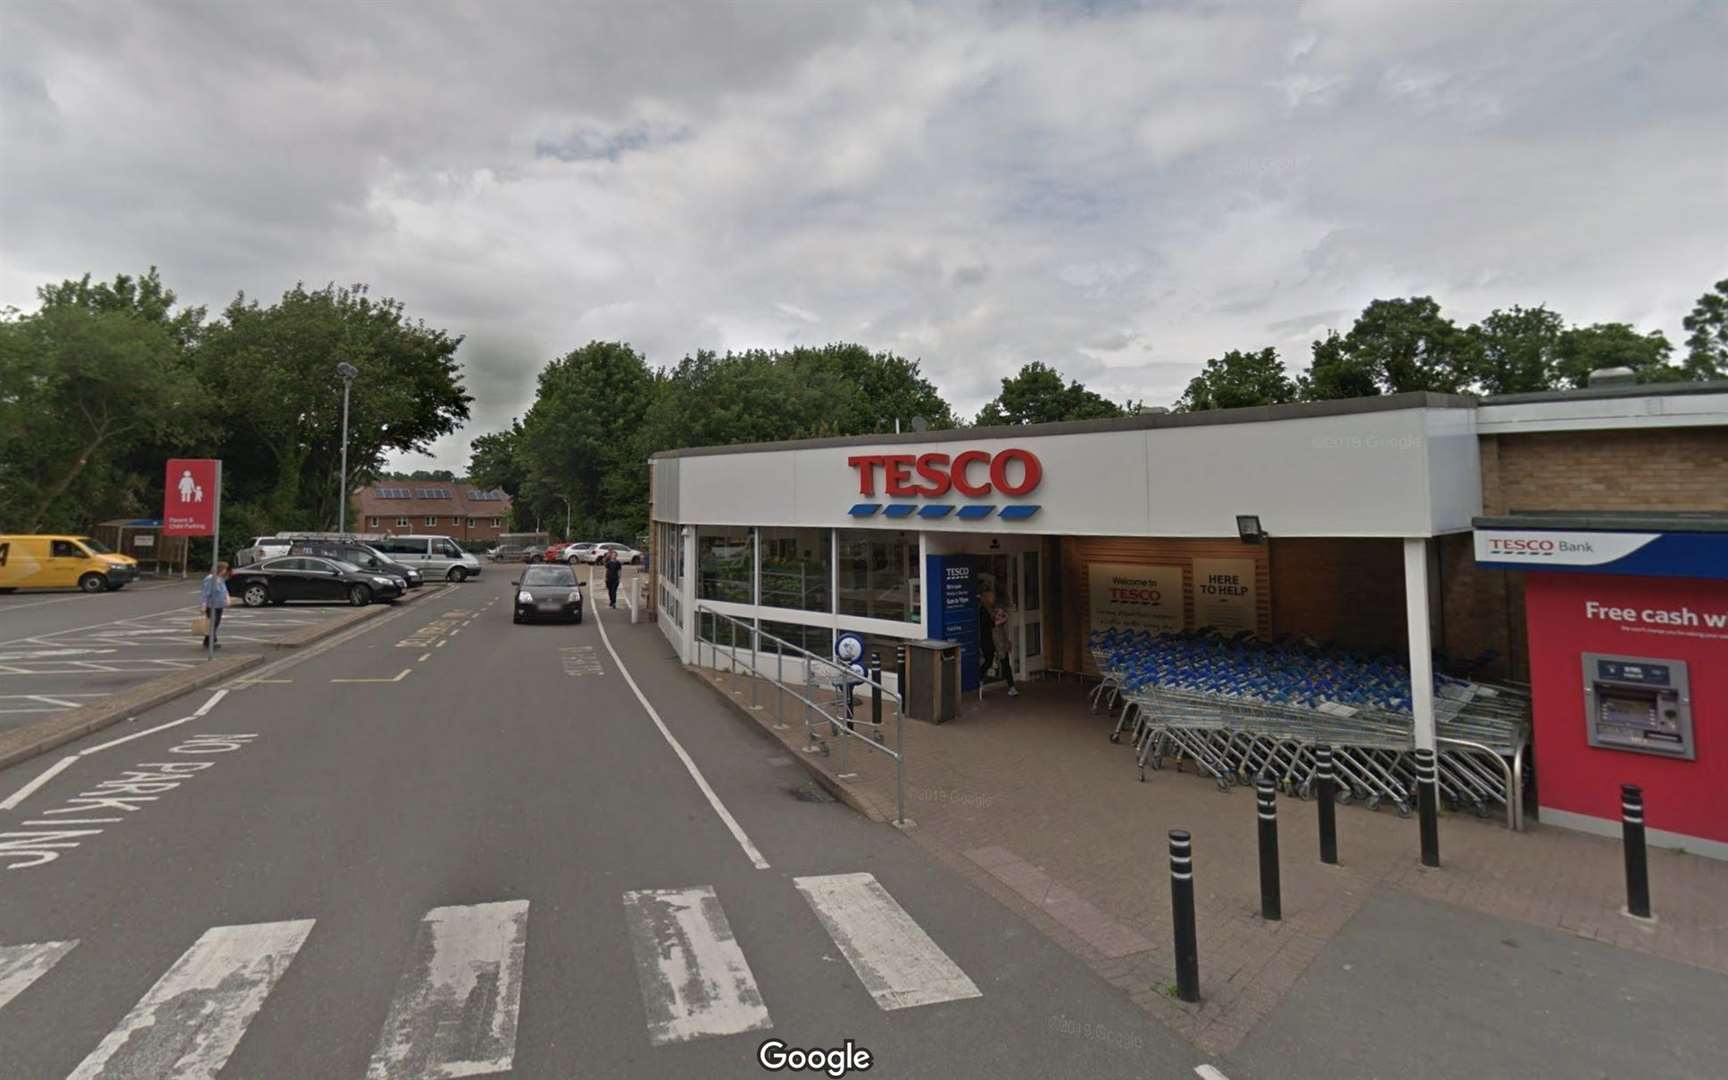 In just over a month, more than £500 worth of goods were reportedly stolen from Tesco in Farleigh Hill. Picture: Google